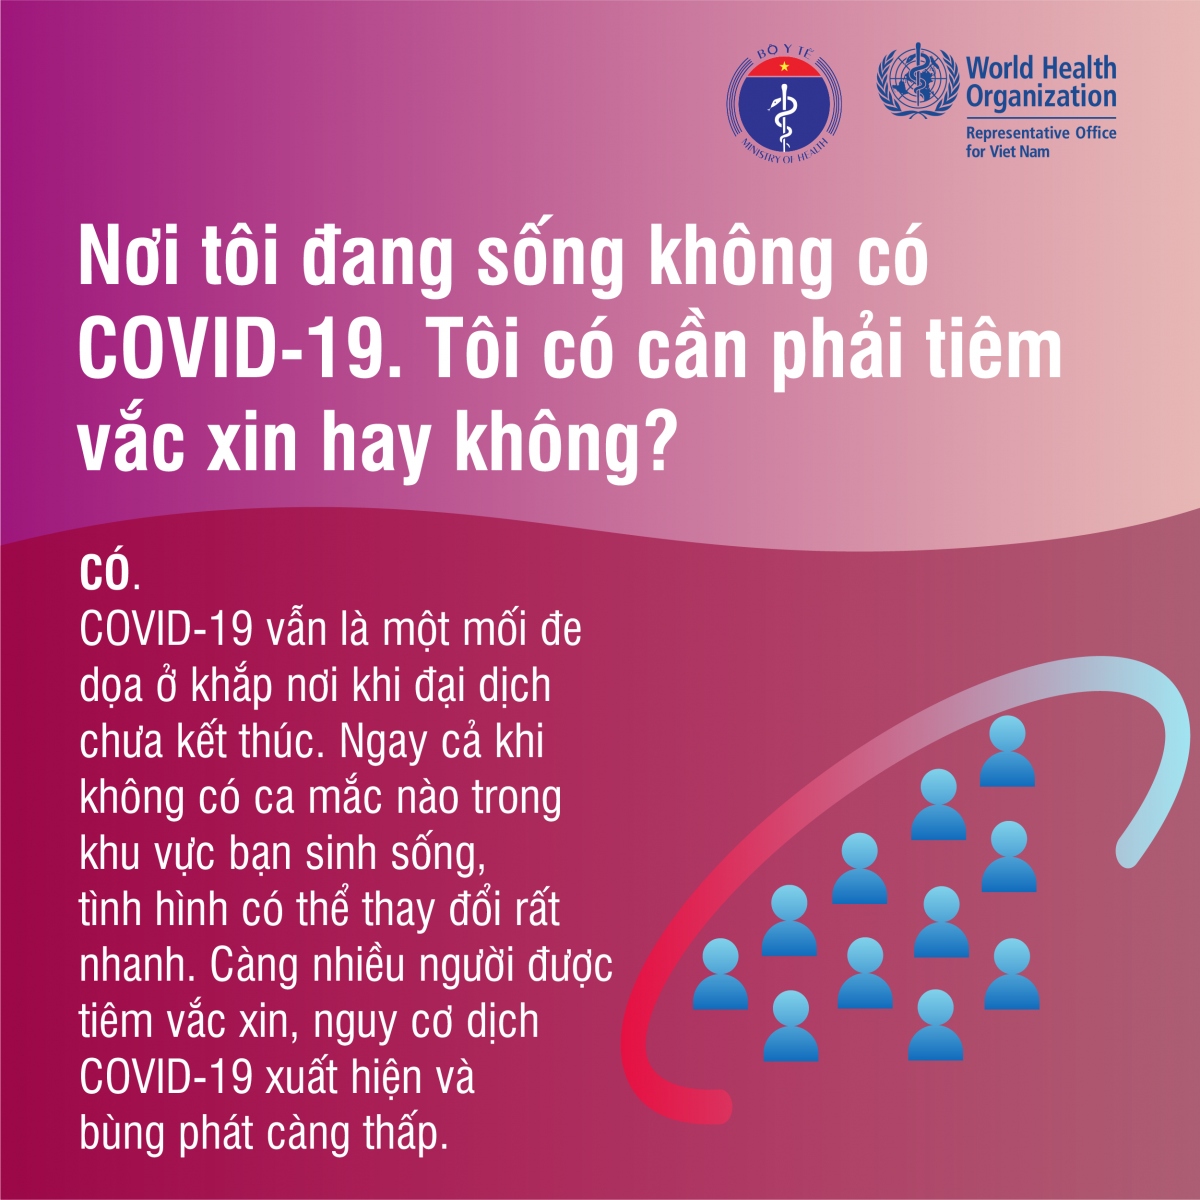 co can tiem vaccine covid-19 neu he mien dich khoe manh hinh anh 3